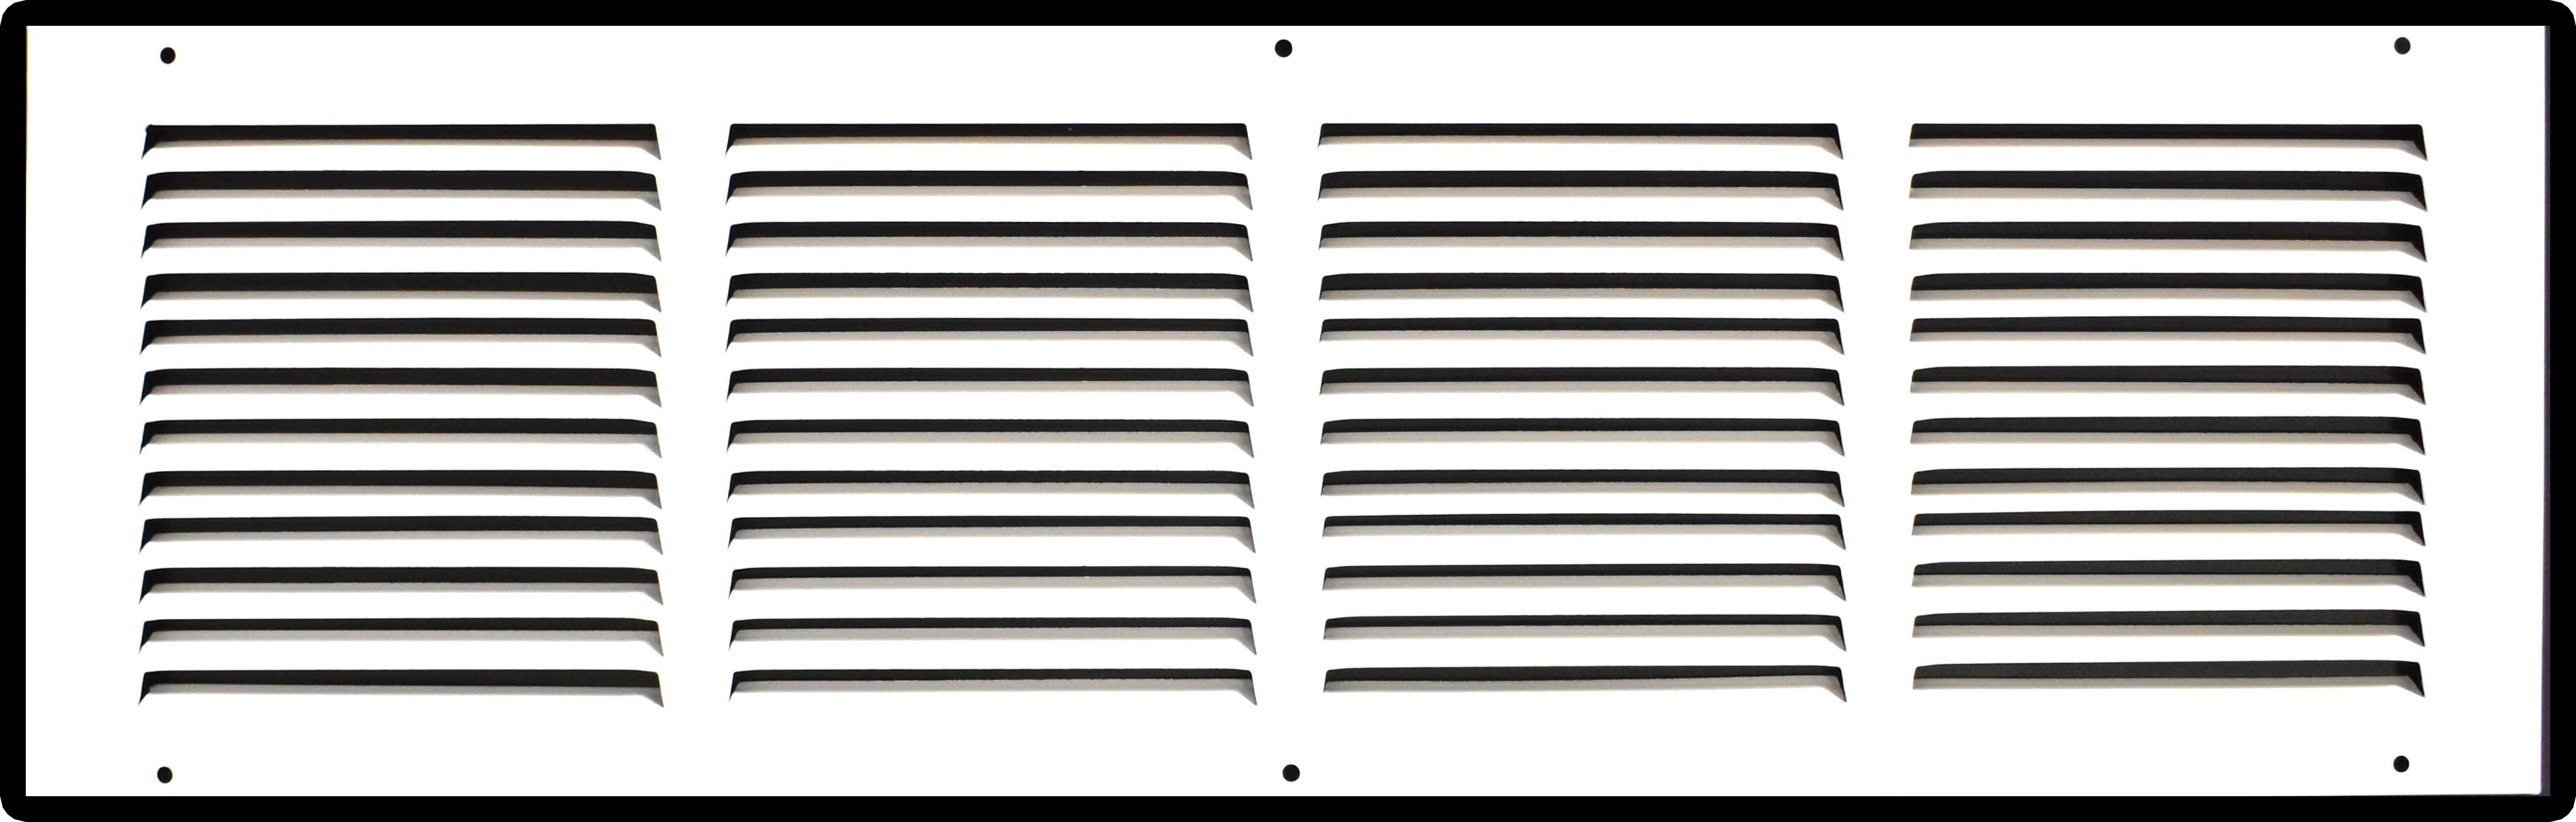 airgrilles 24" x 6" duct opening   hd steel return air grille for sidewall and ceiling  agc  7agc-flt-wh-24x6 756014649666 - 1